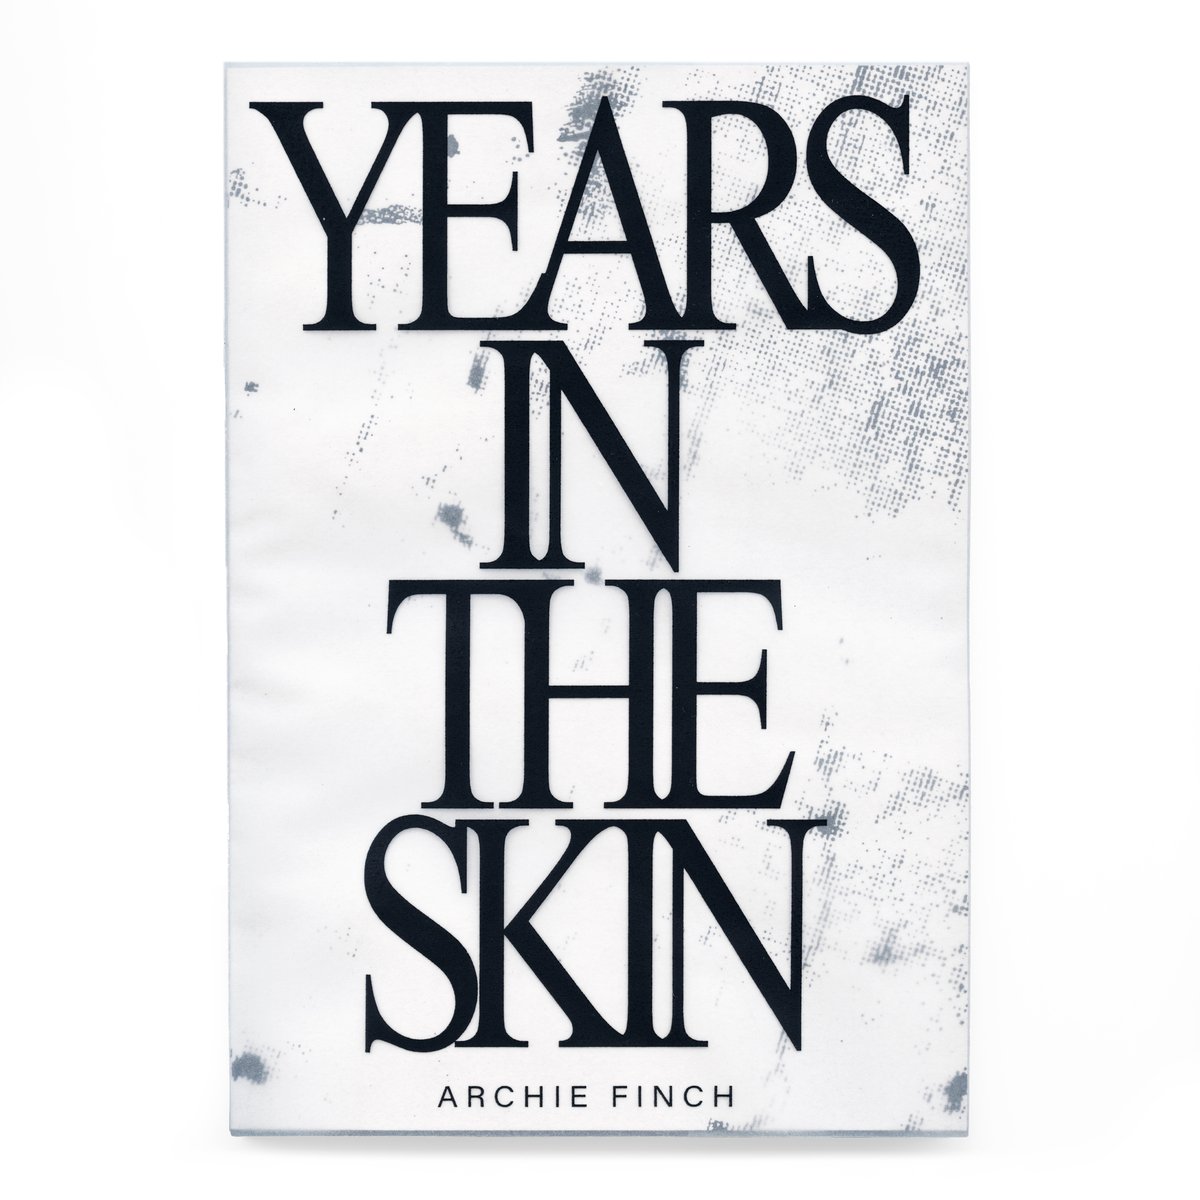 Image of Years In The Skin by Archie Finch 